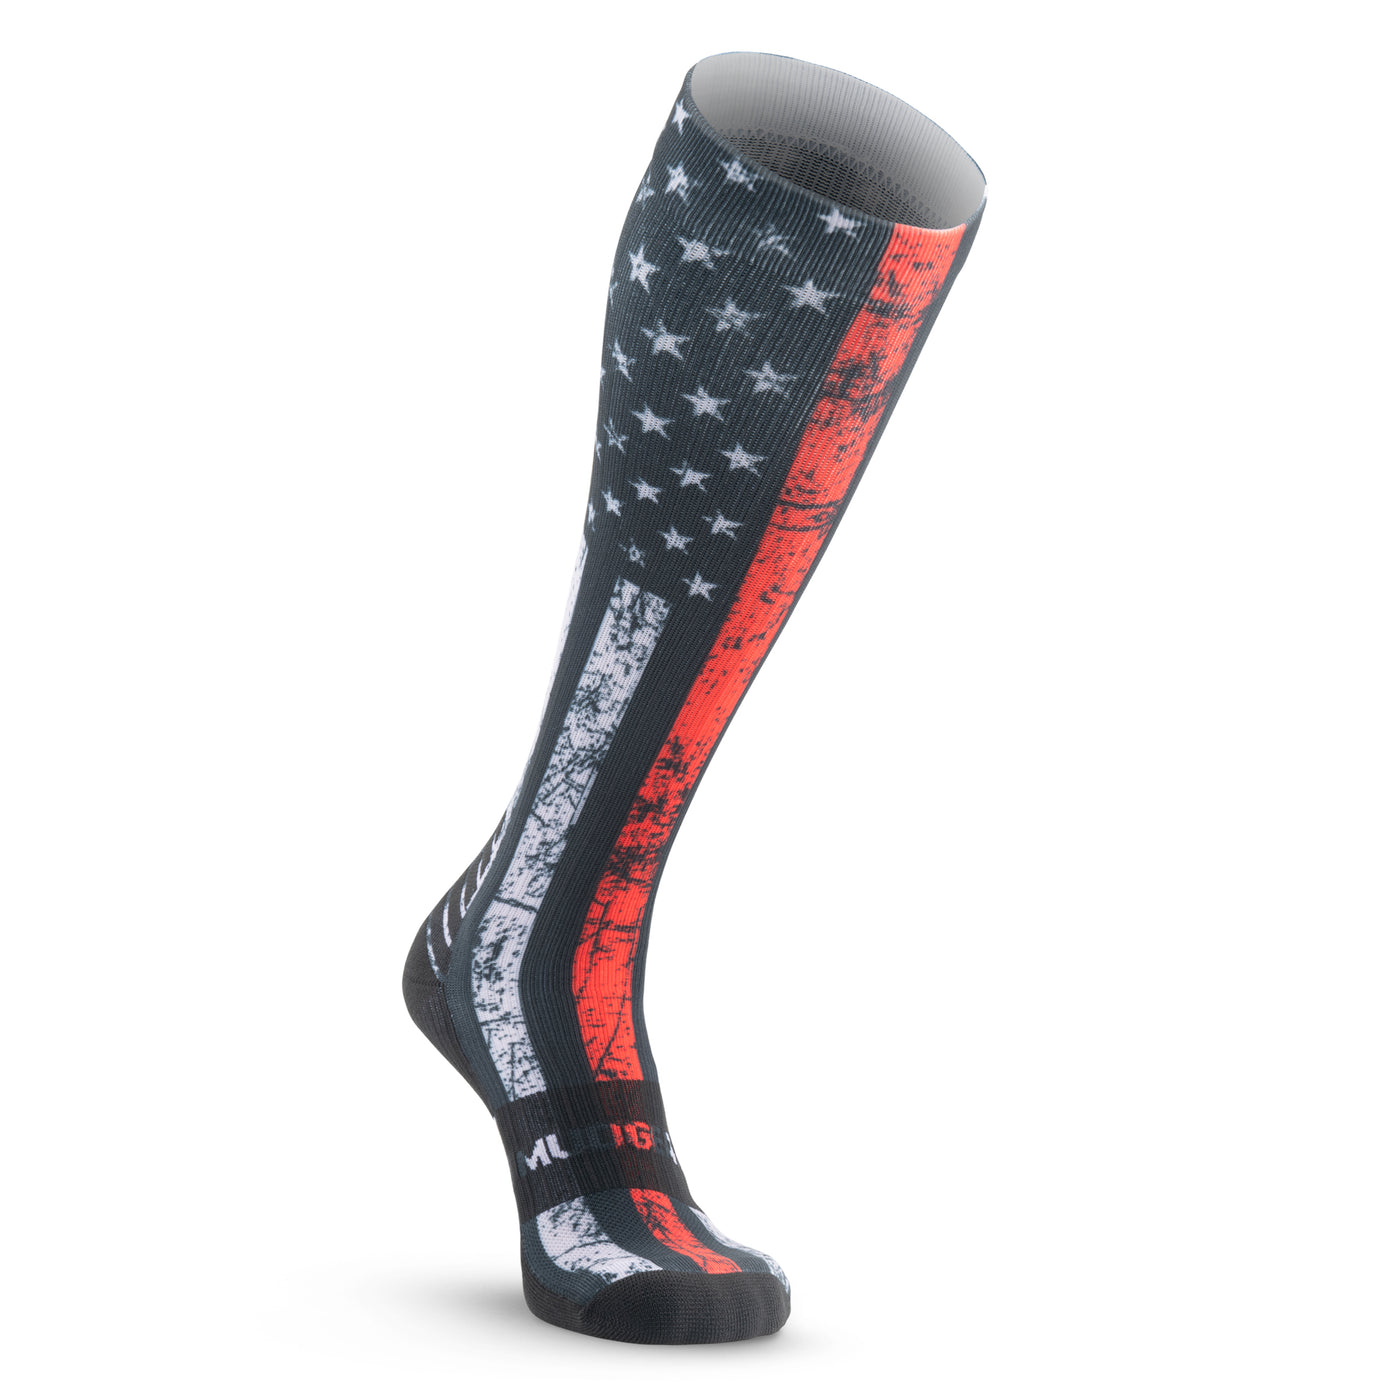 Mudgear compression obstacle race sock -Responder Red